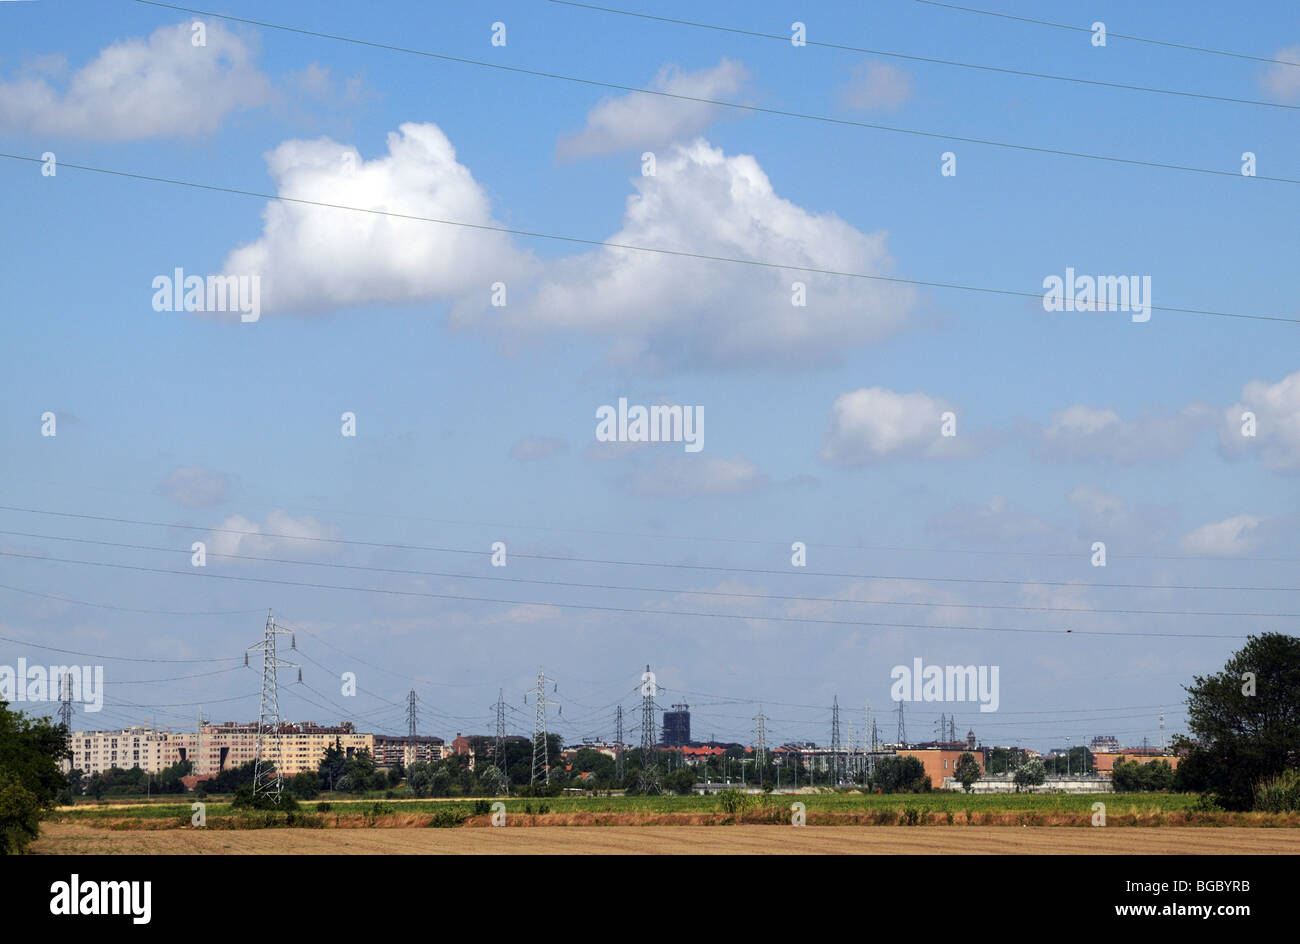 High voltage power cables wires and pylons crossing farm land in the foreground Southern periphery of Milan Lombardy Italy Stock Photo